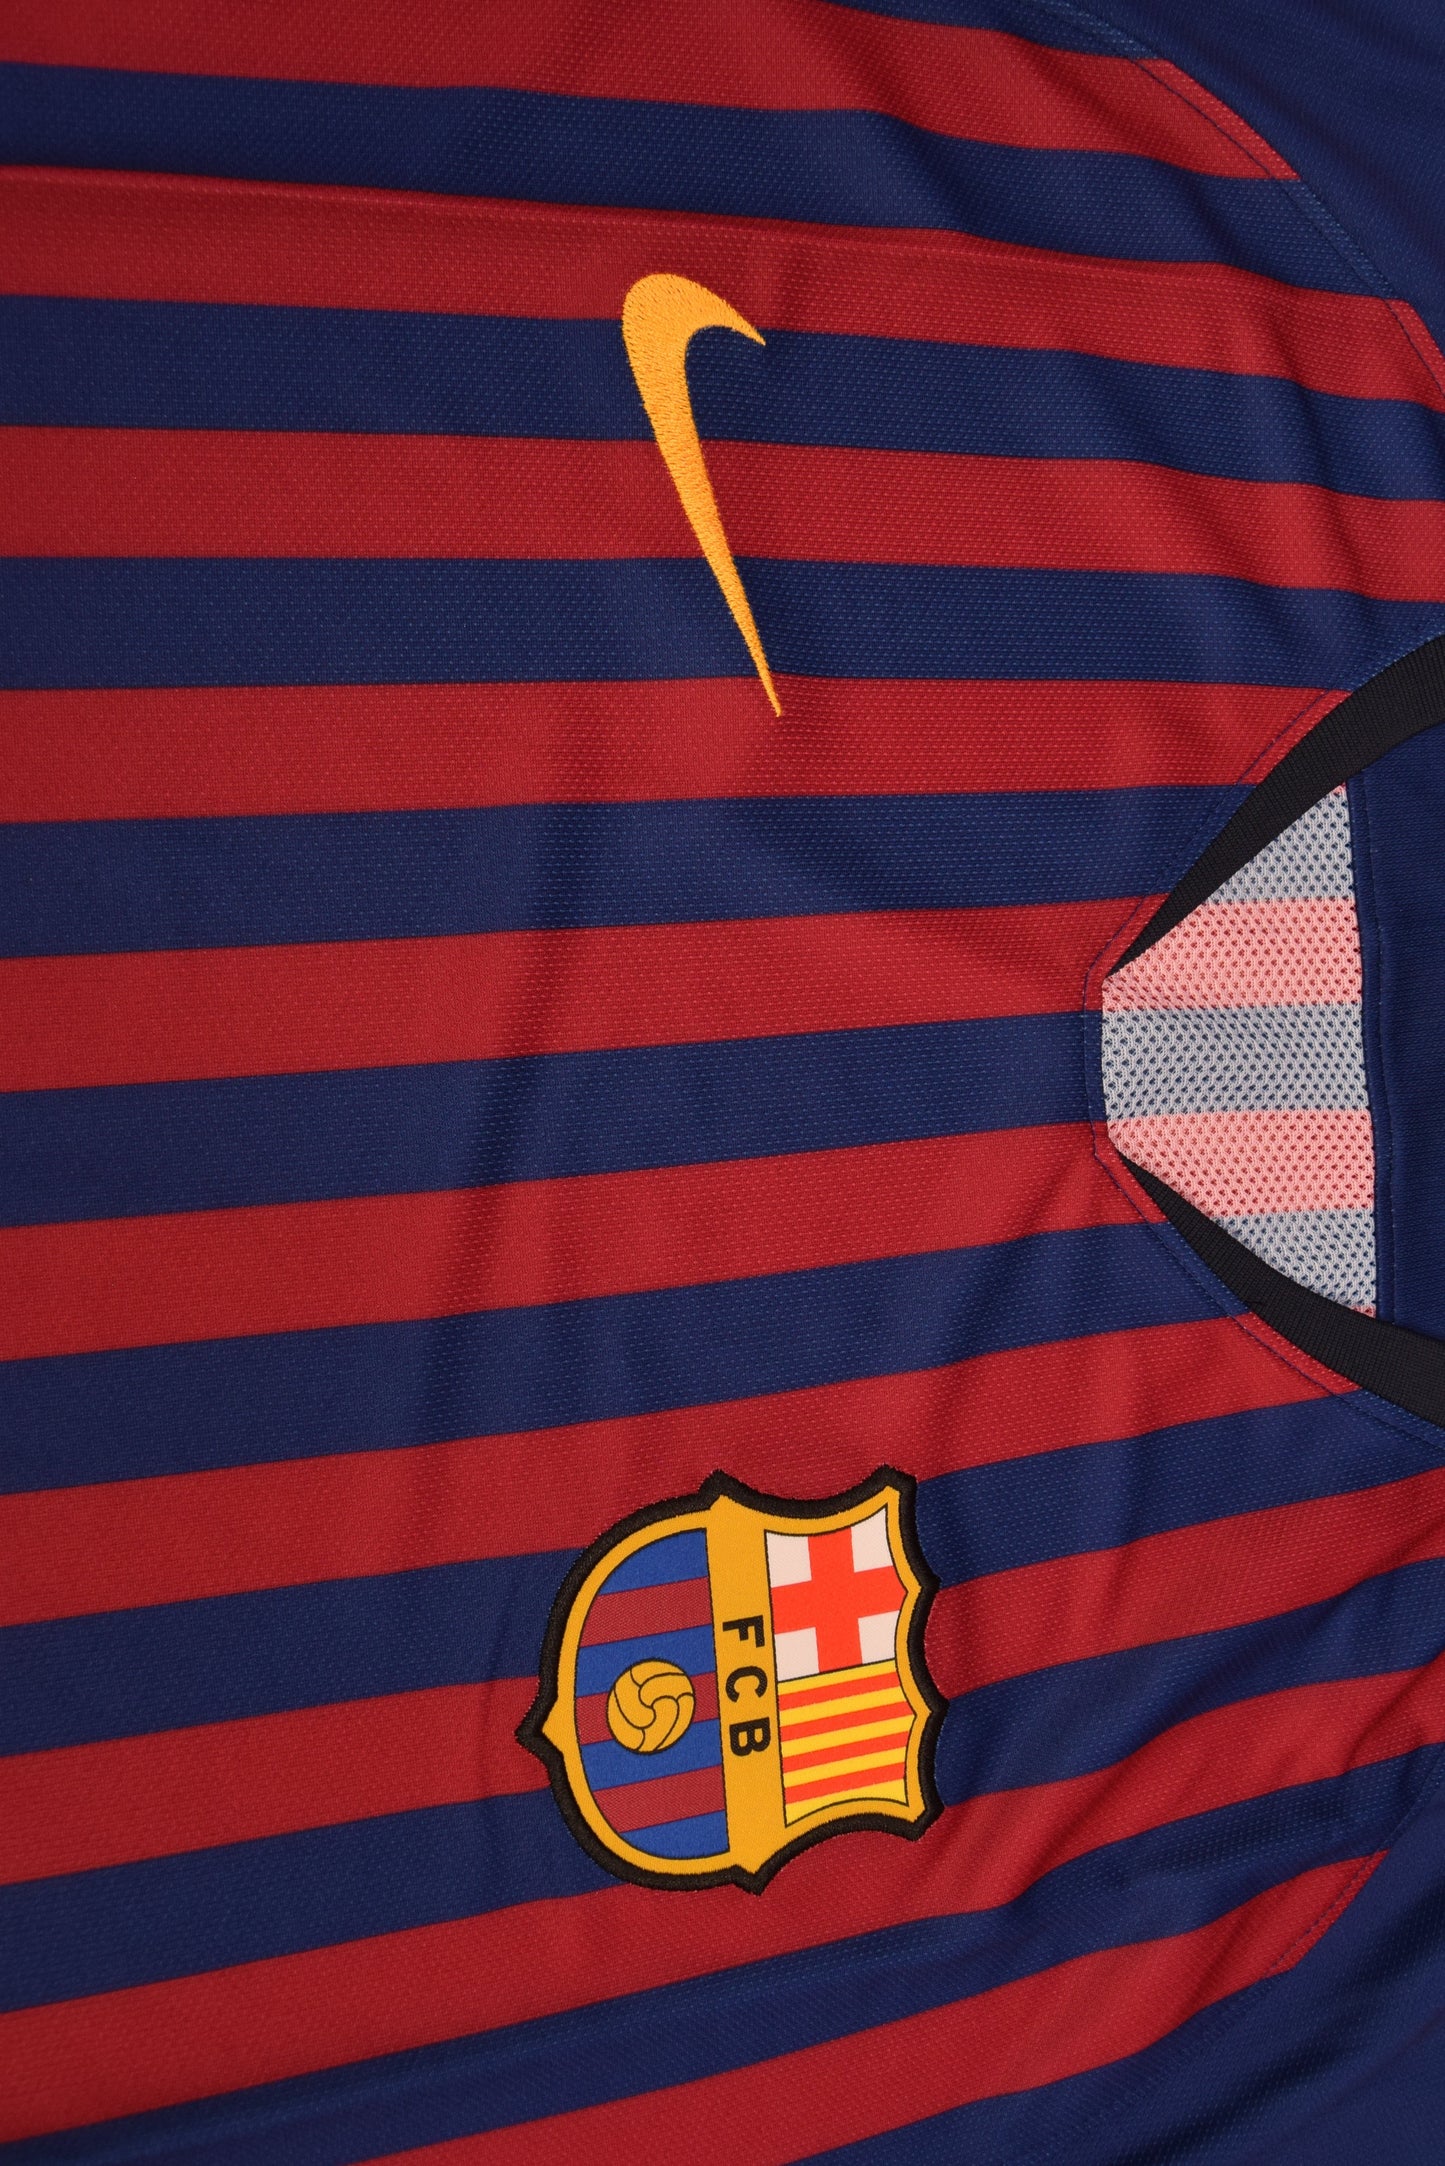 Authentic New FC Barcelona Nike 2018 - 2019 Home Football Shirt BNWT Deadstock Long Sleeves Size L Red Blue